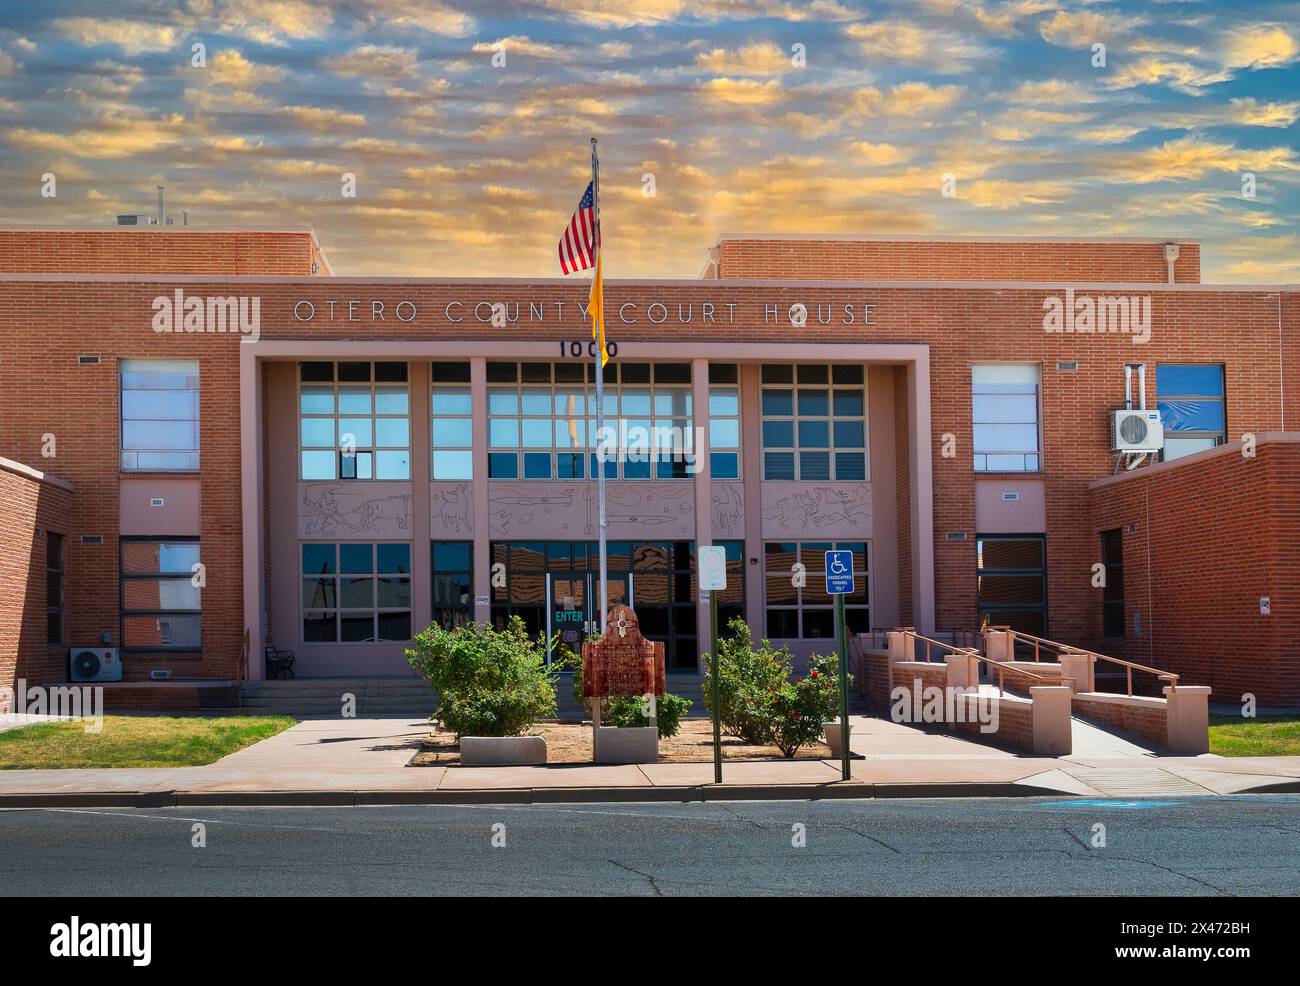 Sunset highlights the Otero County Court house in downtown Alamagordo, NM, USA Stock Photo